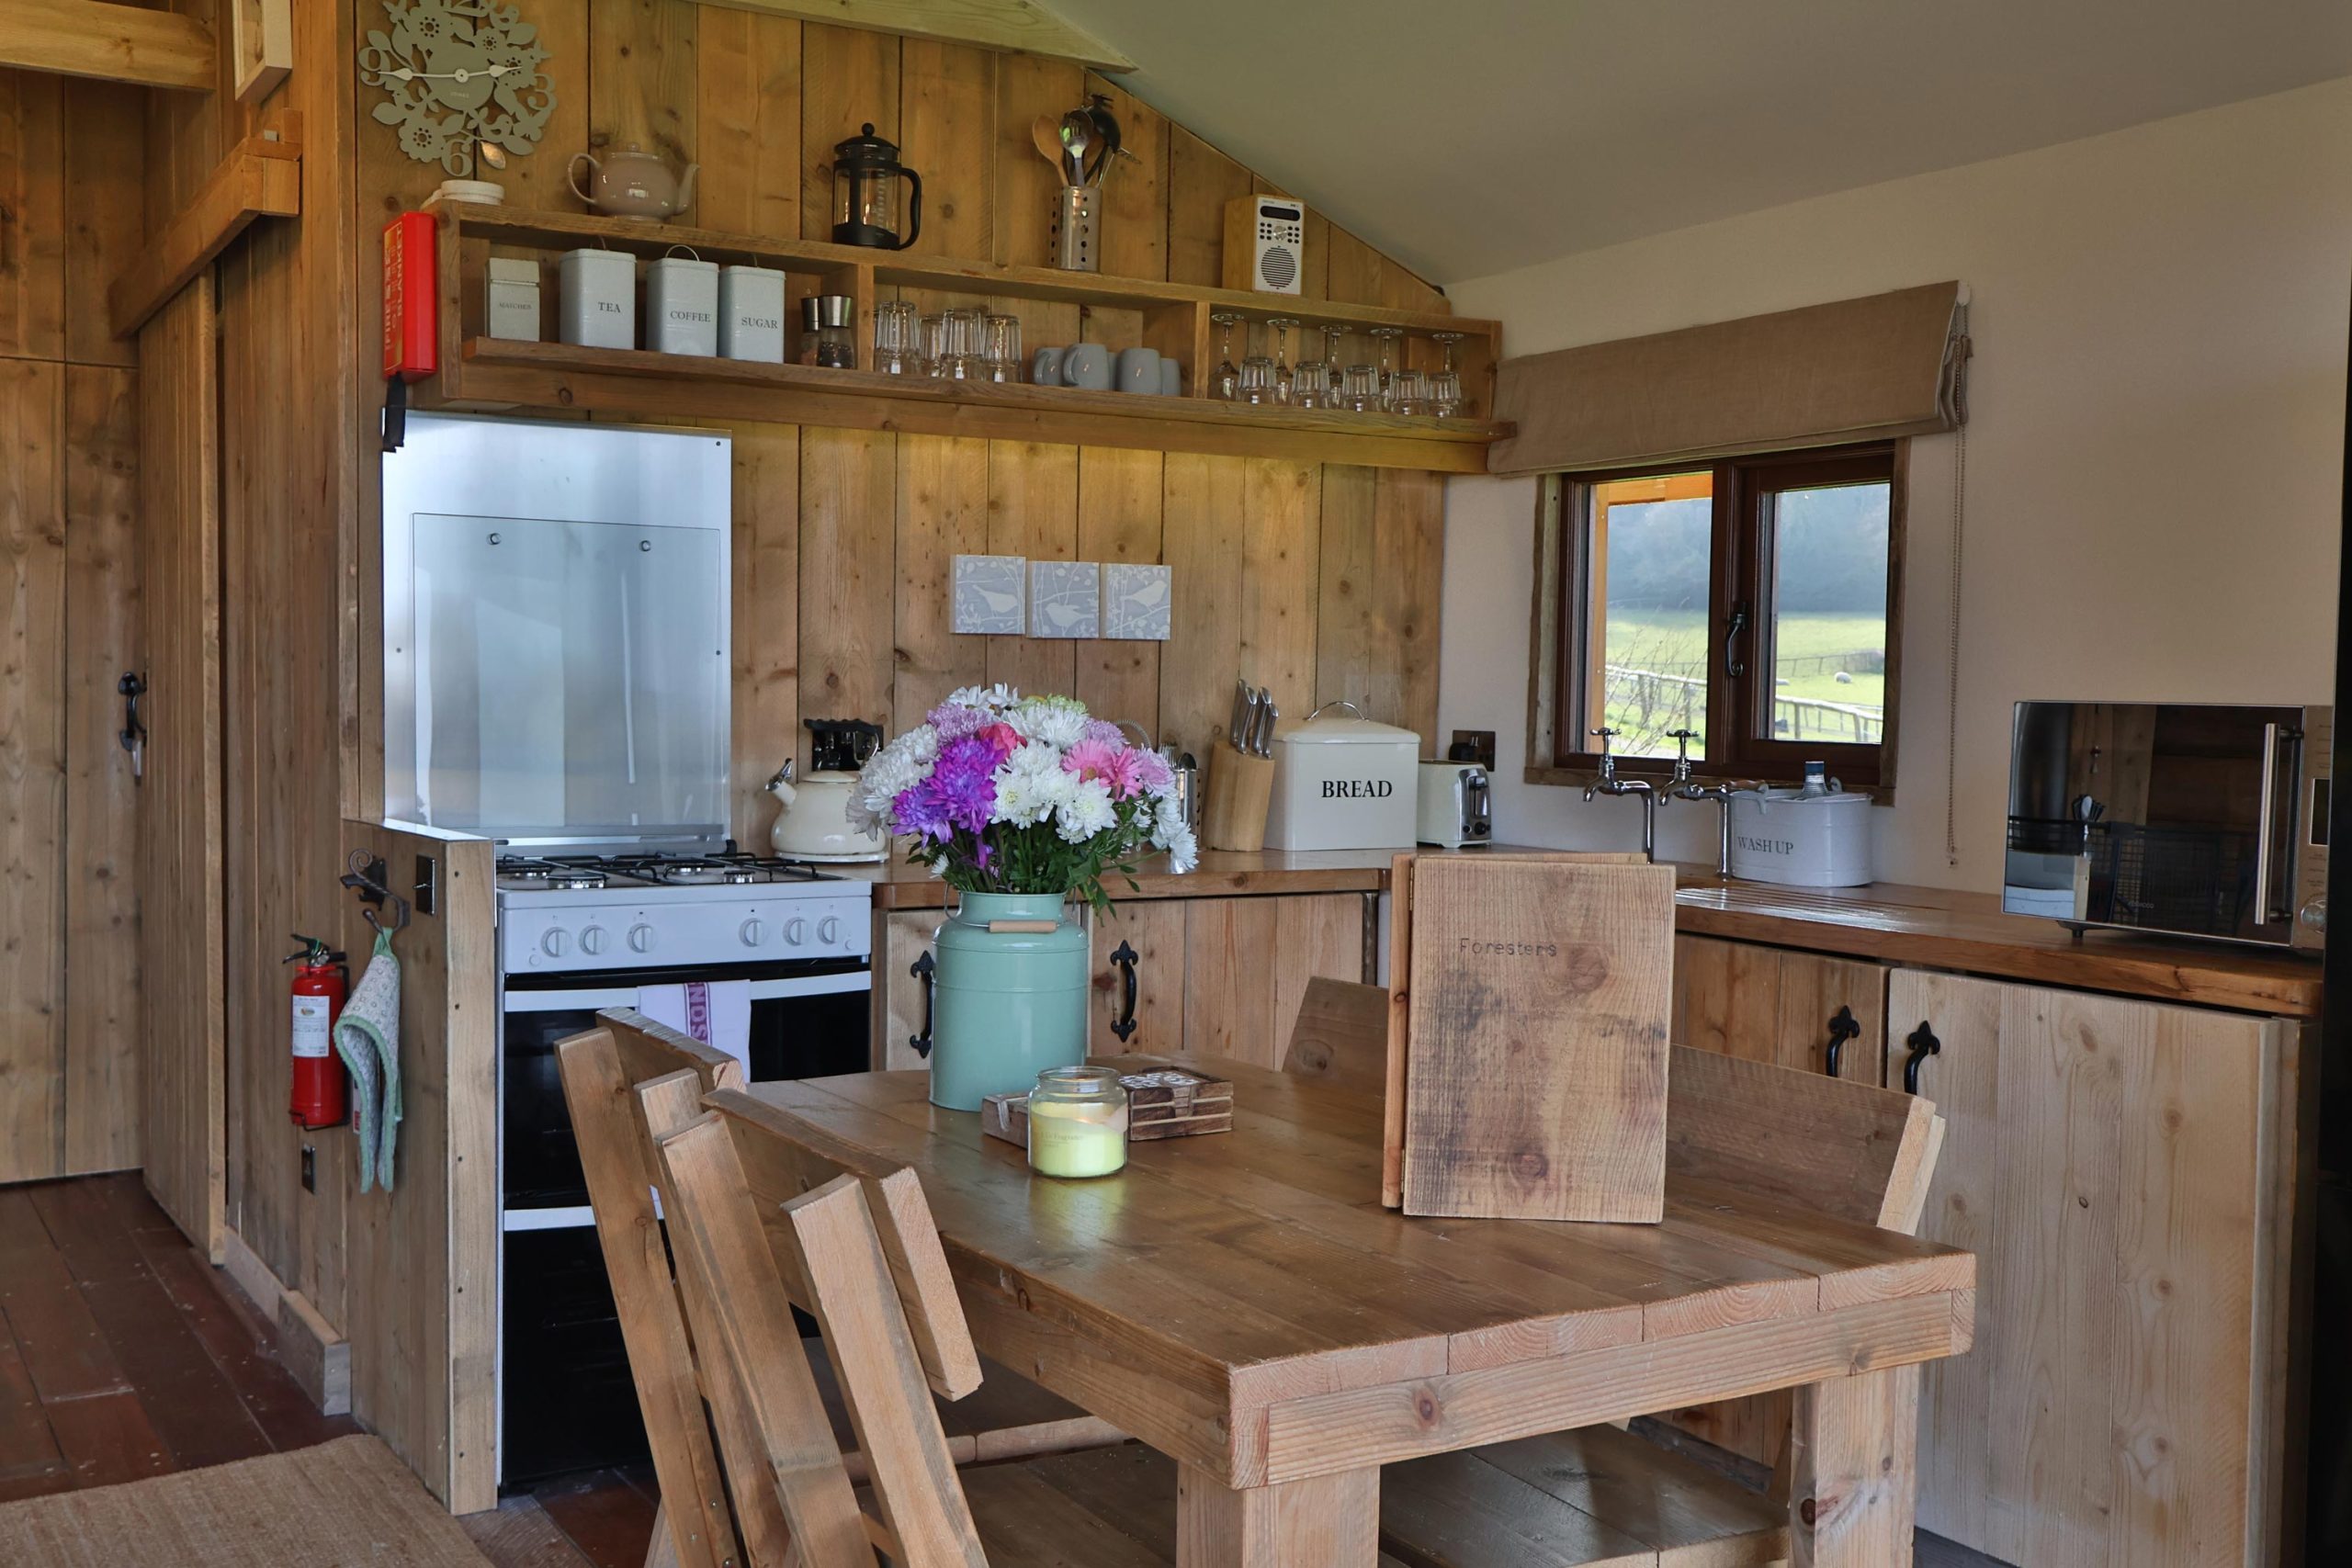 Beautiful wooden kitchen diner with hand crafted units and a table and chairs.